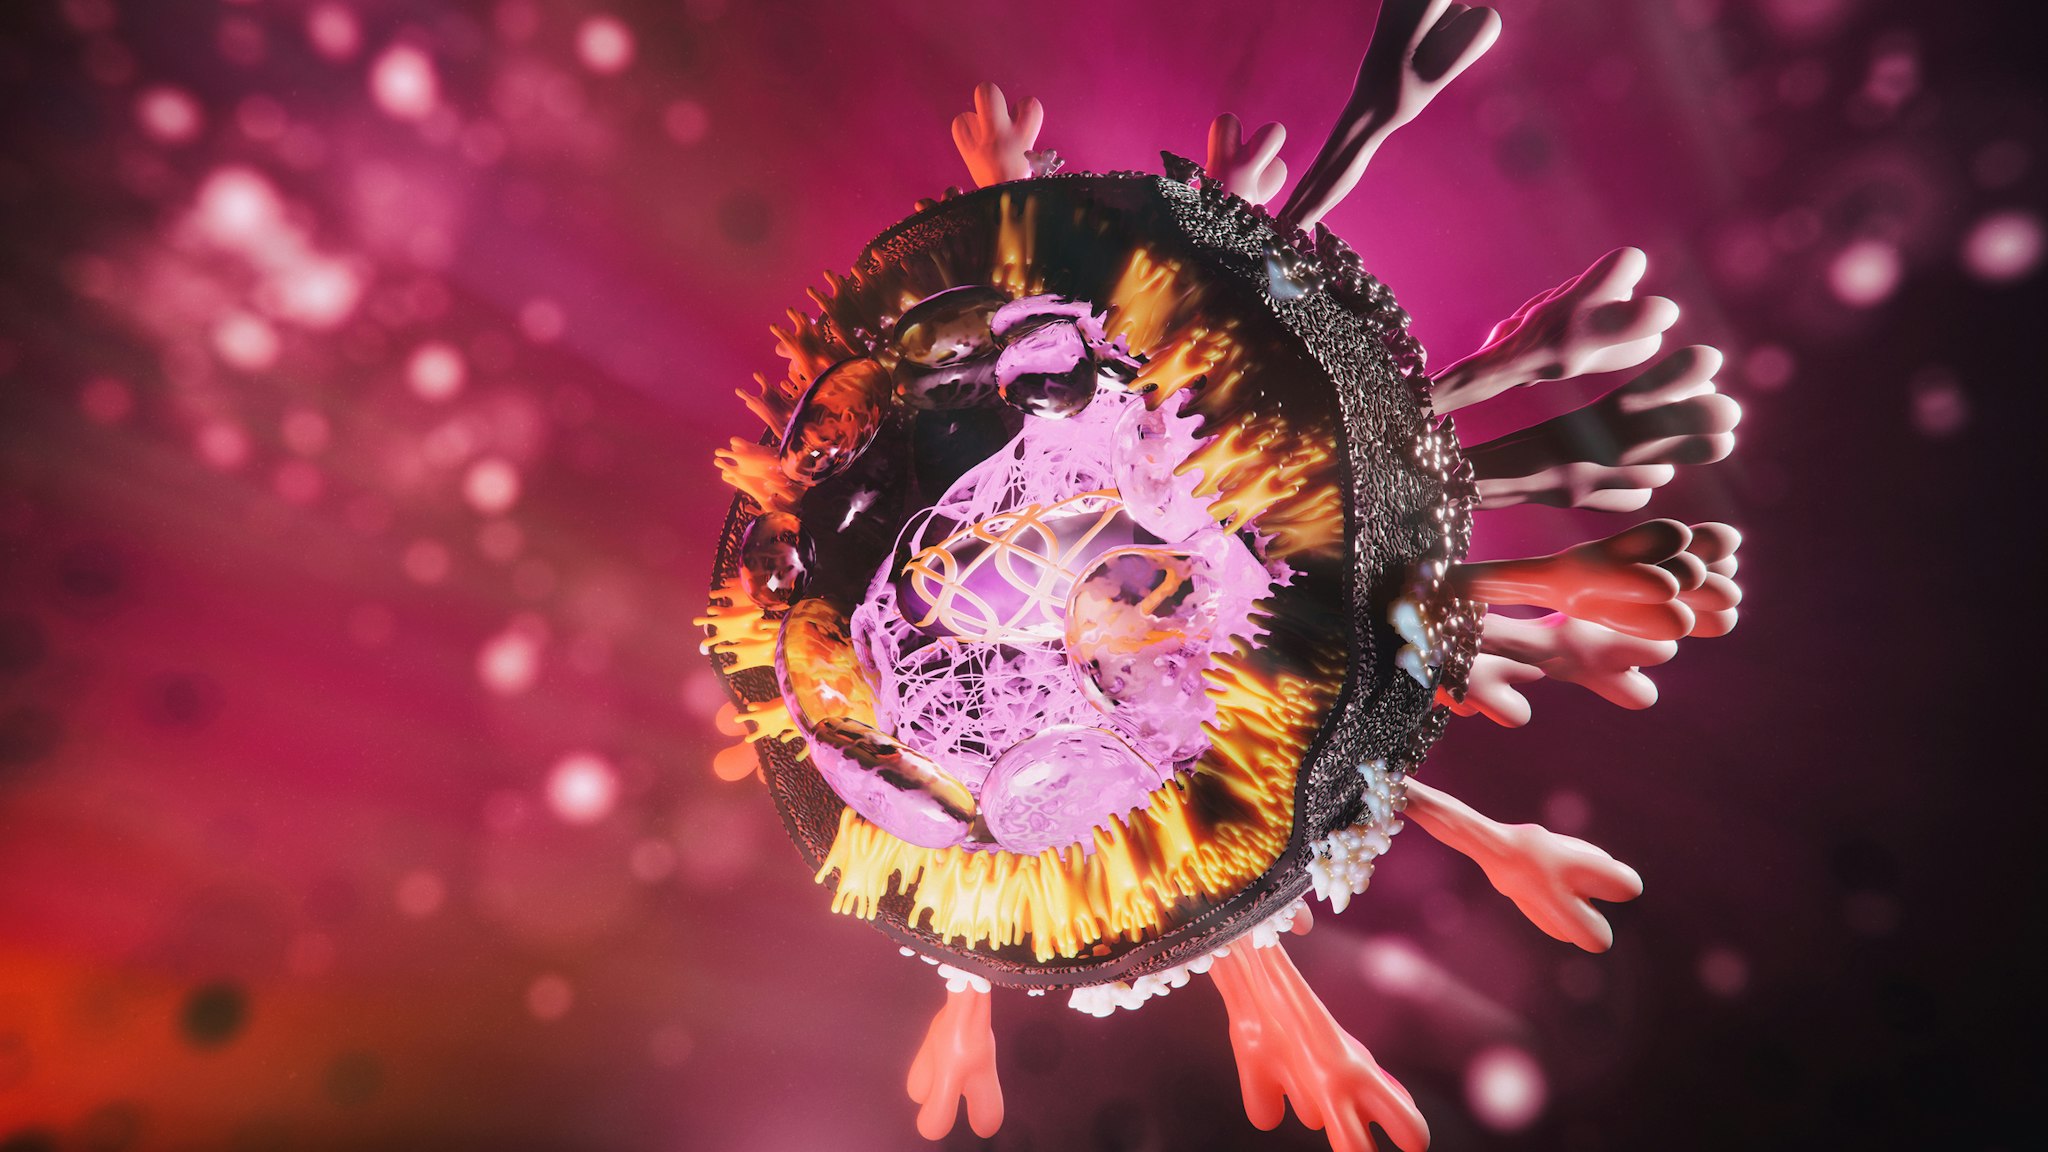 Abs COVID-19 structure - 3d rendered image structure view on black background. Viral Infection concept. MERS-CoV, SARS-CoV, ТОРС, 2019-nCoV, Wuhan Coronavirus. Design element. RNA. High resolution.